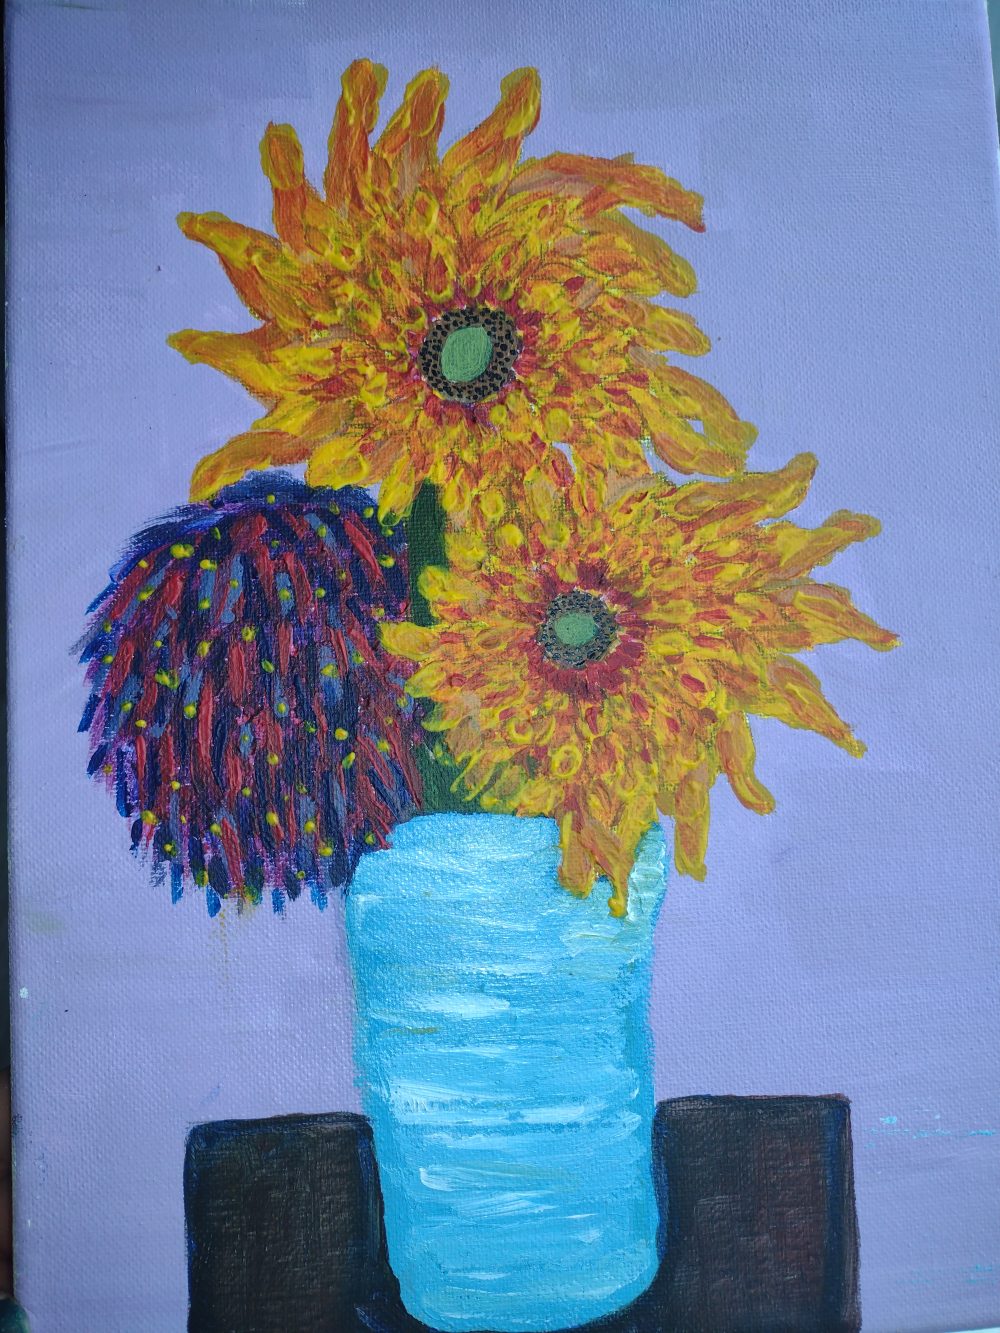 There is a lovely set of sun flowers displaying vibrant colors, sitting on a small drawer.